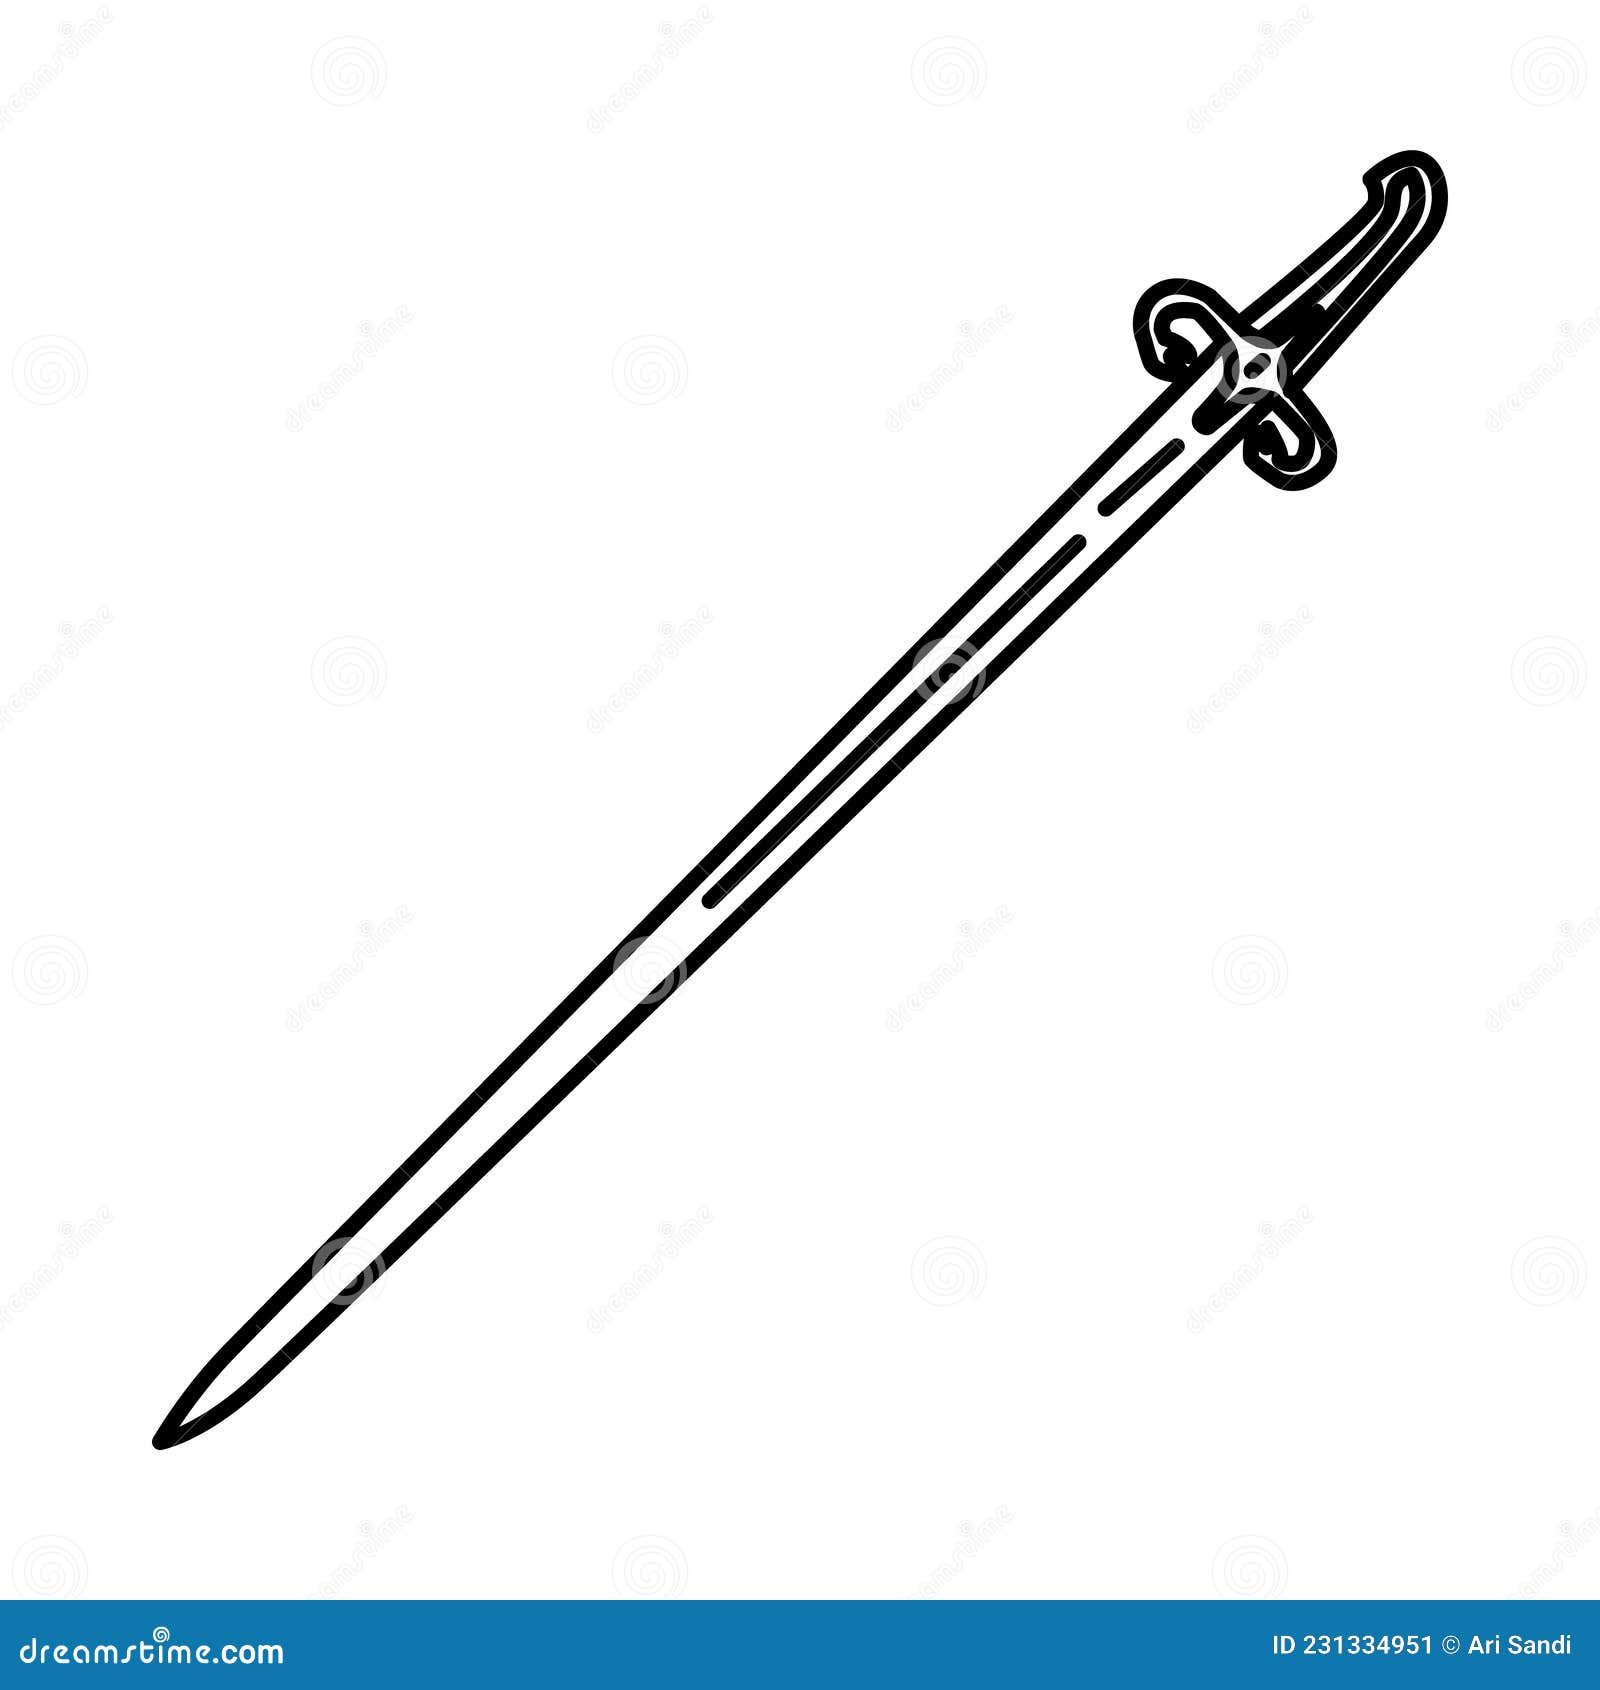 ma thur al-fijar prophet muhammad historical sword icon. doodle hand drawn or outline icon style